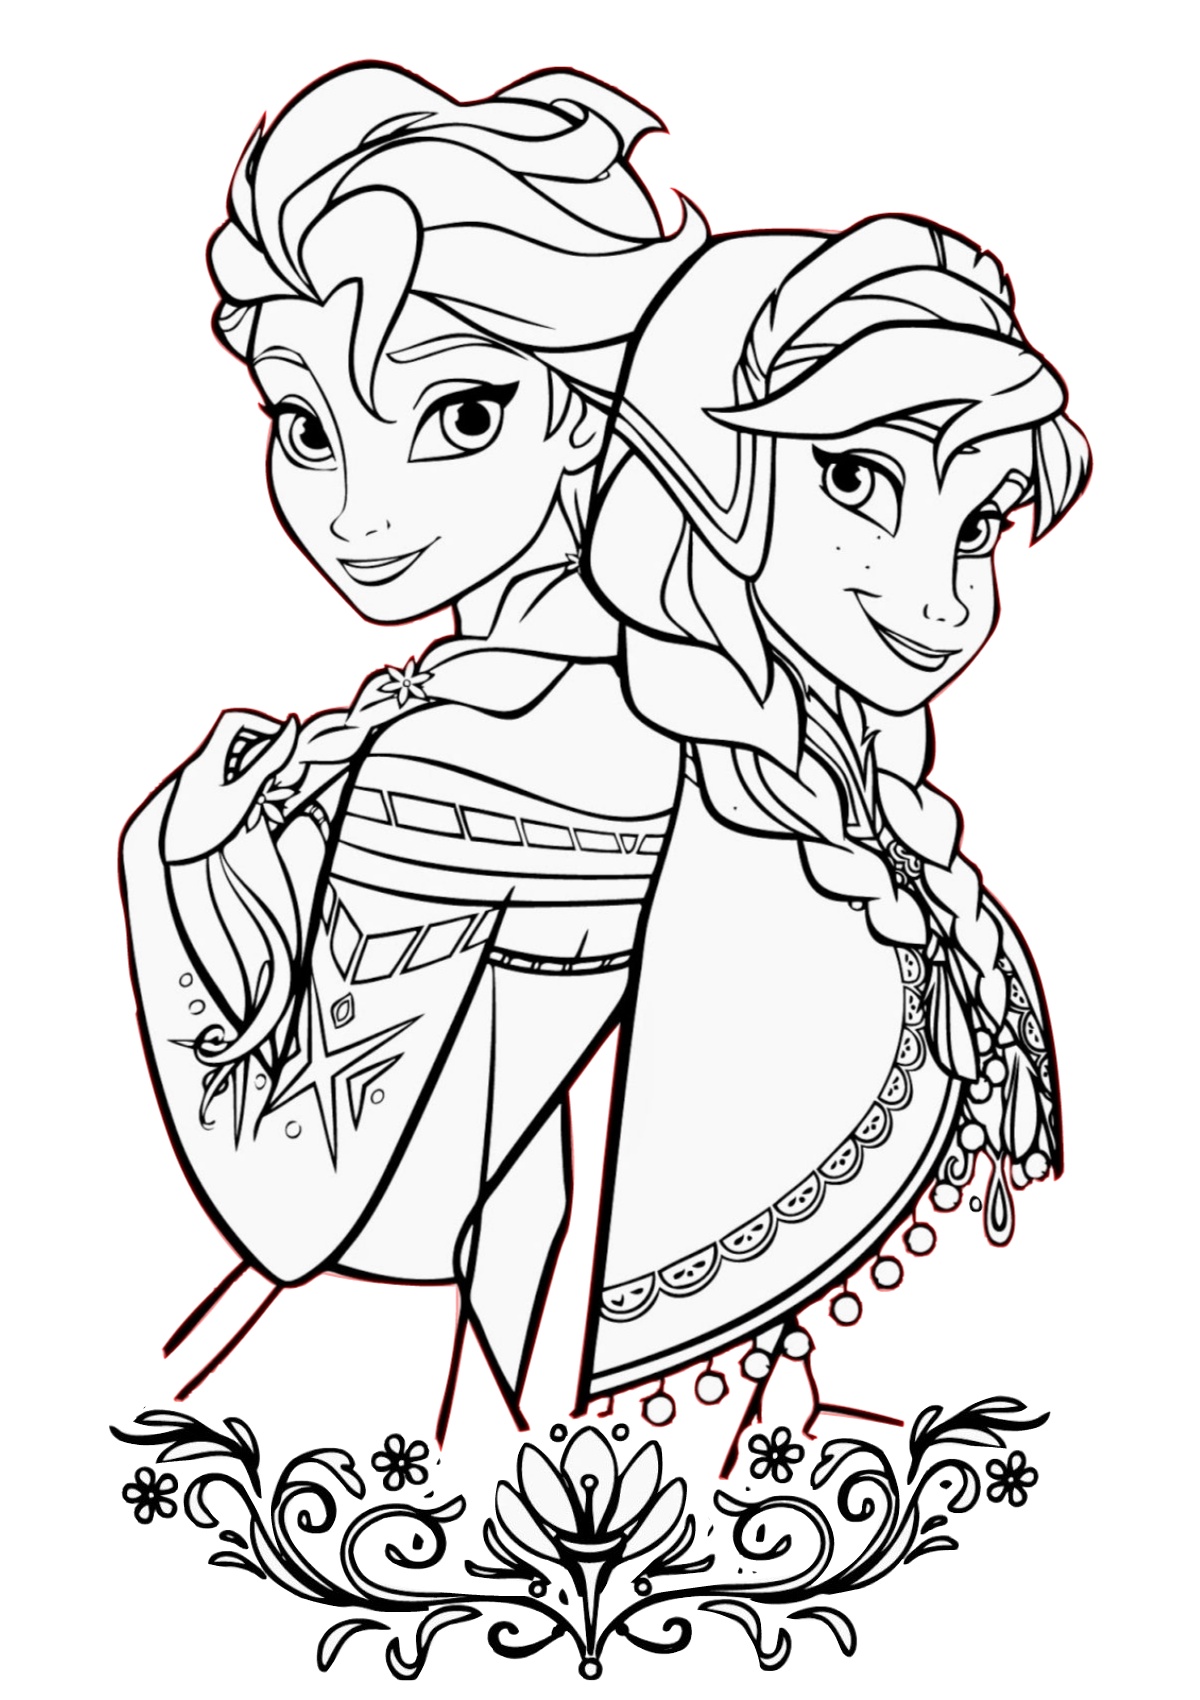 frozen-coloring-pages-baby-elsa